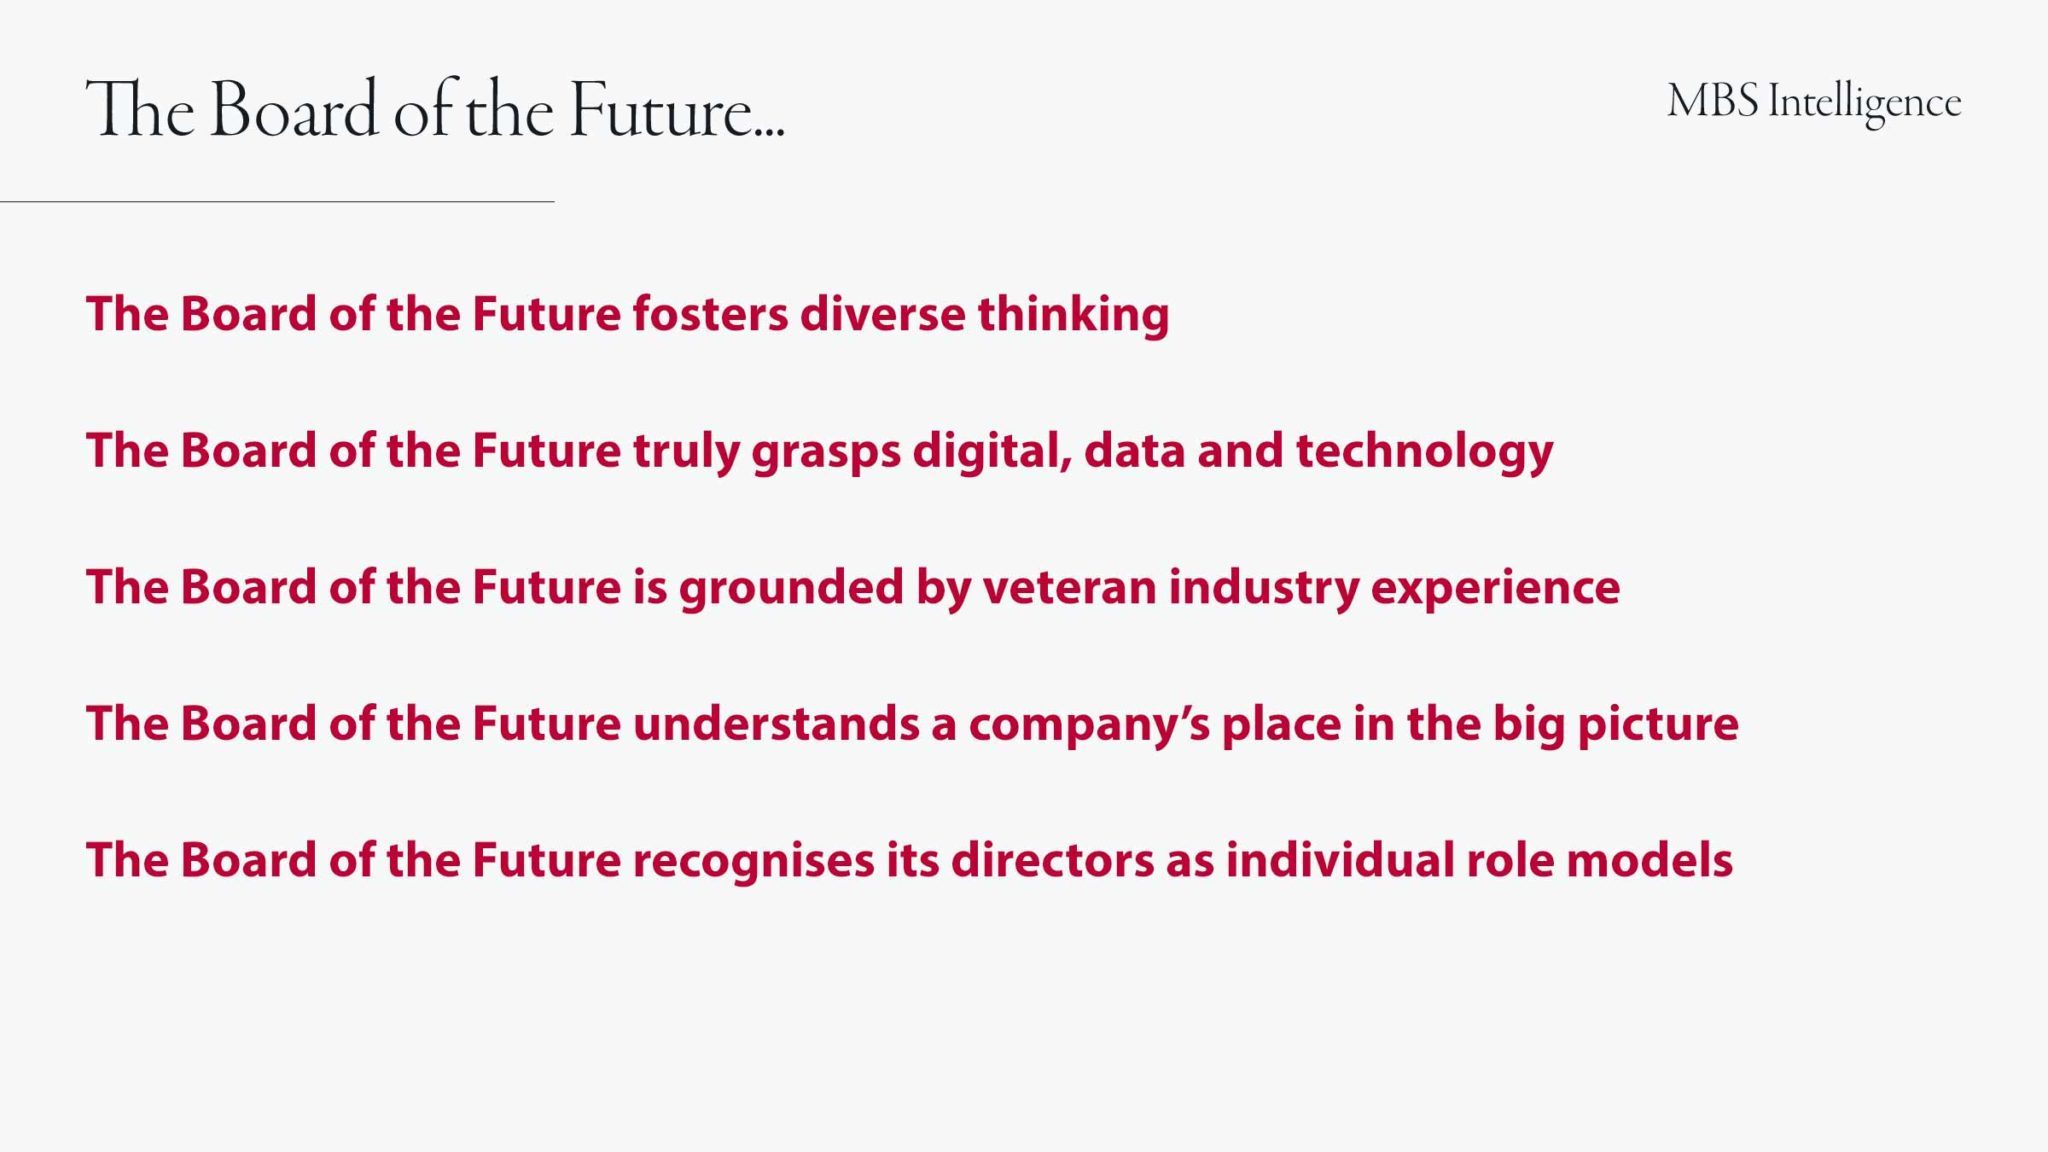 The Board of the Future: fosters diverse thinking; truly grasps digital; is grounded by veteran industry talent; understands a company's place in the bigger picture; and recognises its directors as individual role models. 